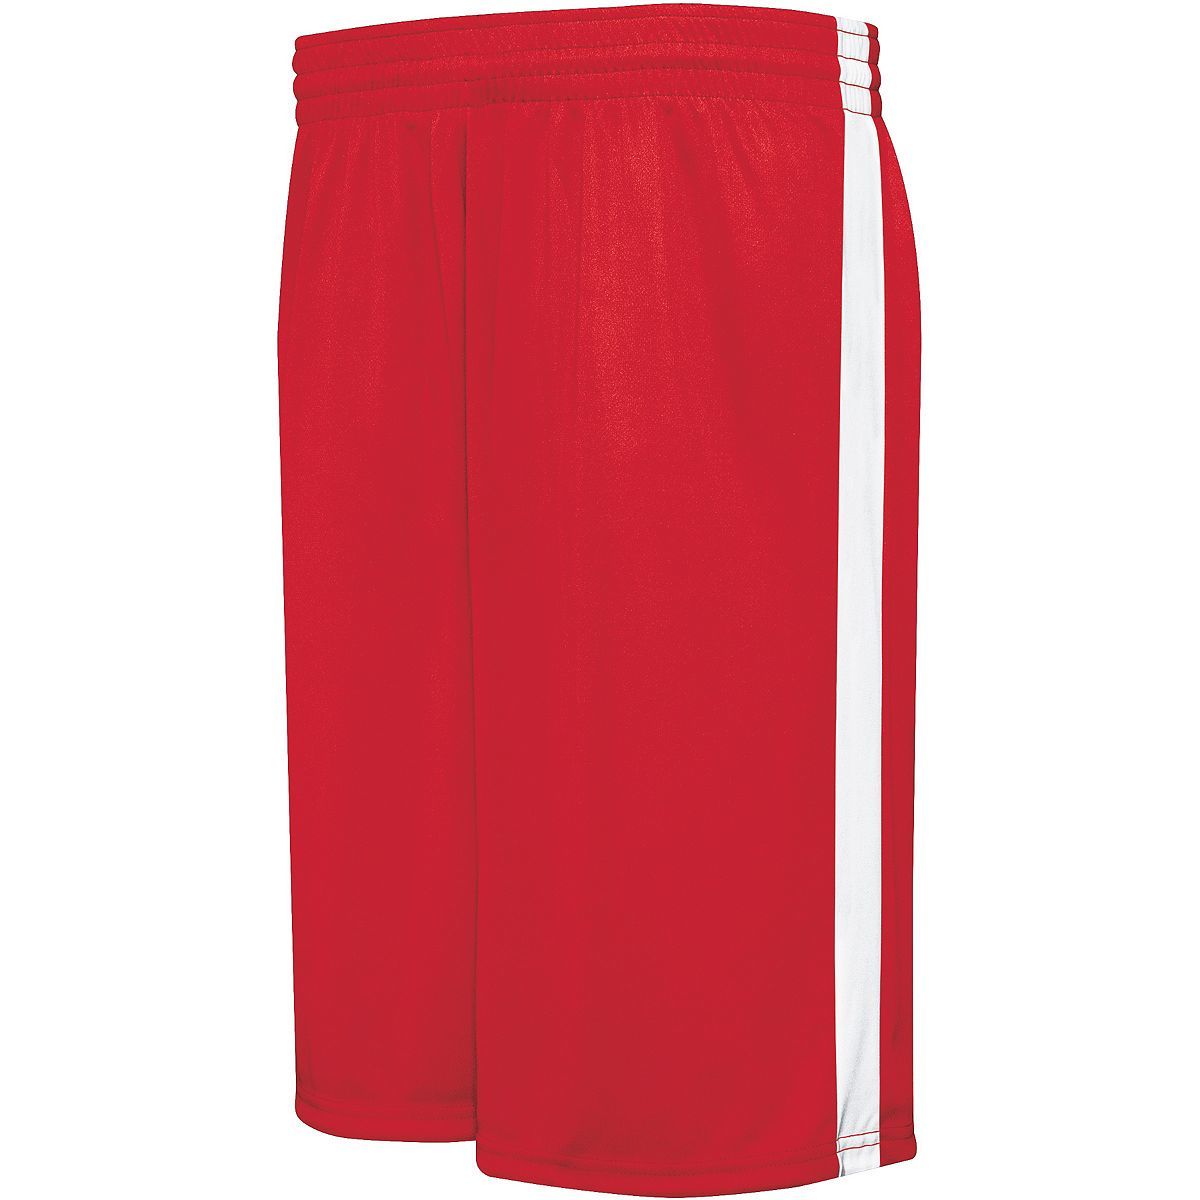 Augusta Sportswear Youth Competition Reversible Shorts in Scarlet/White  -Part of the Youth, Youth-Shorts, Augusta-Products, Basketball, All-Sports, All-Sports-1 product lines at KanaleyCreations.com